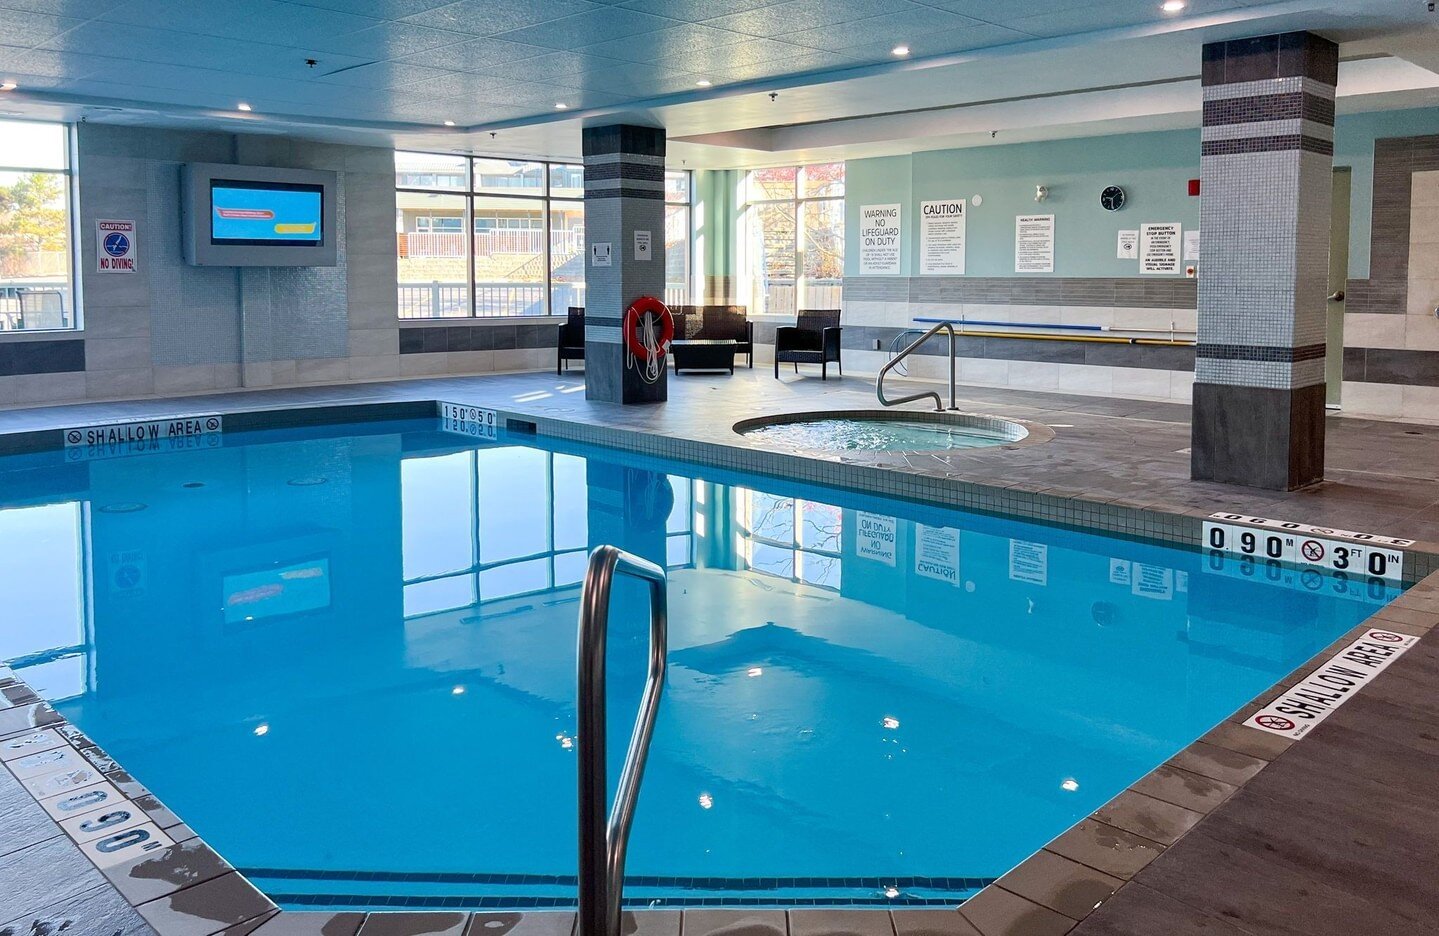 From invigorating morning laps to leisurely evening dips - don't forget to make a splash in our pool during your stay! 💦 🏊 

Book your stay in #YGK with us at the [ link in bio ]
&bull;
&bull;
&bull;
&bull;
#VisitKingston #MyDowntownKtown #IHGOneRe